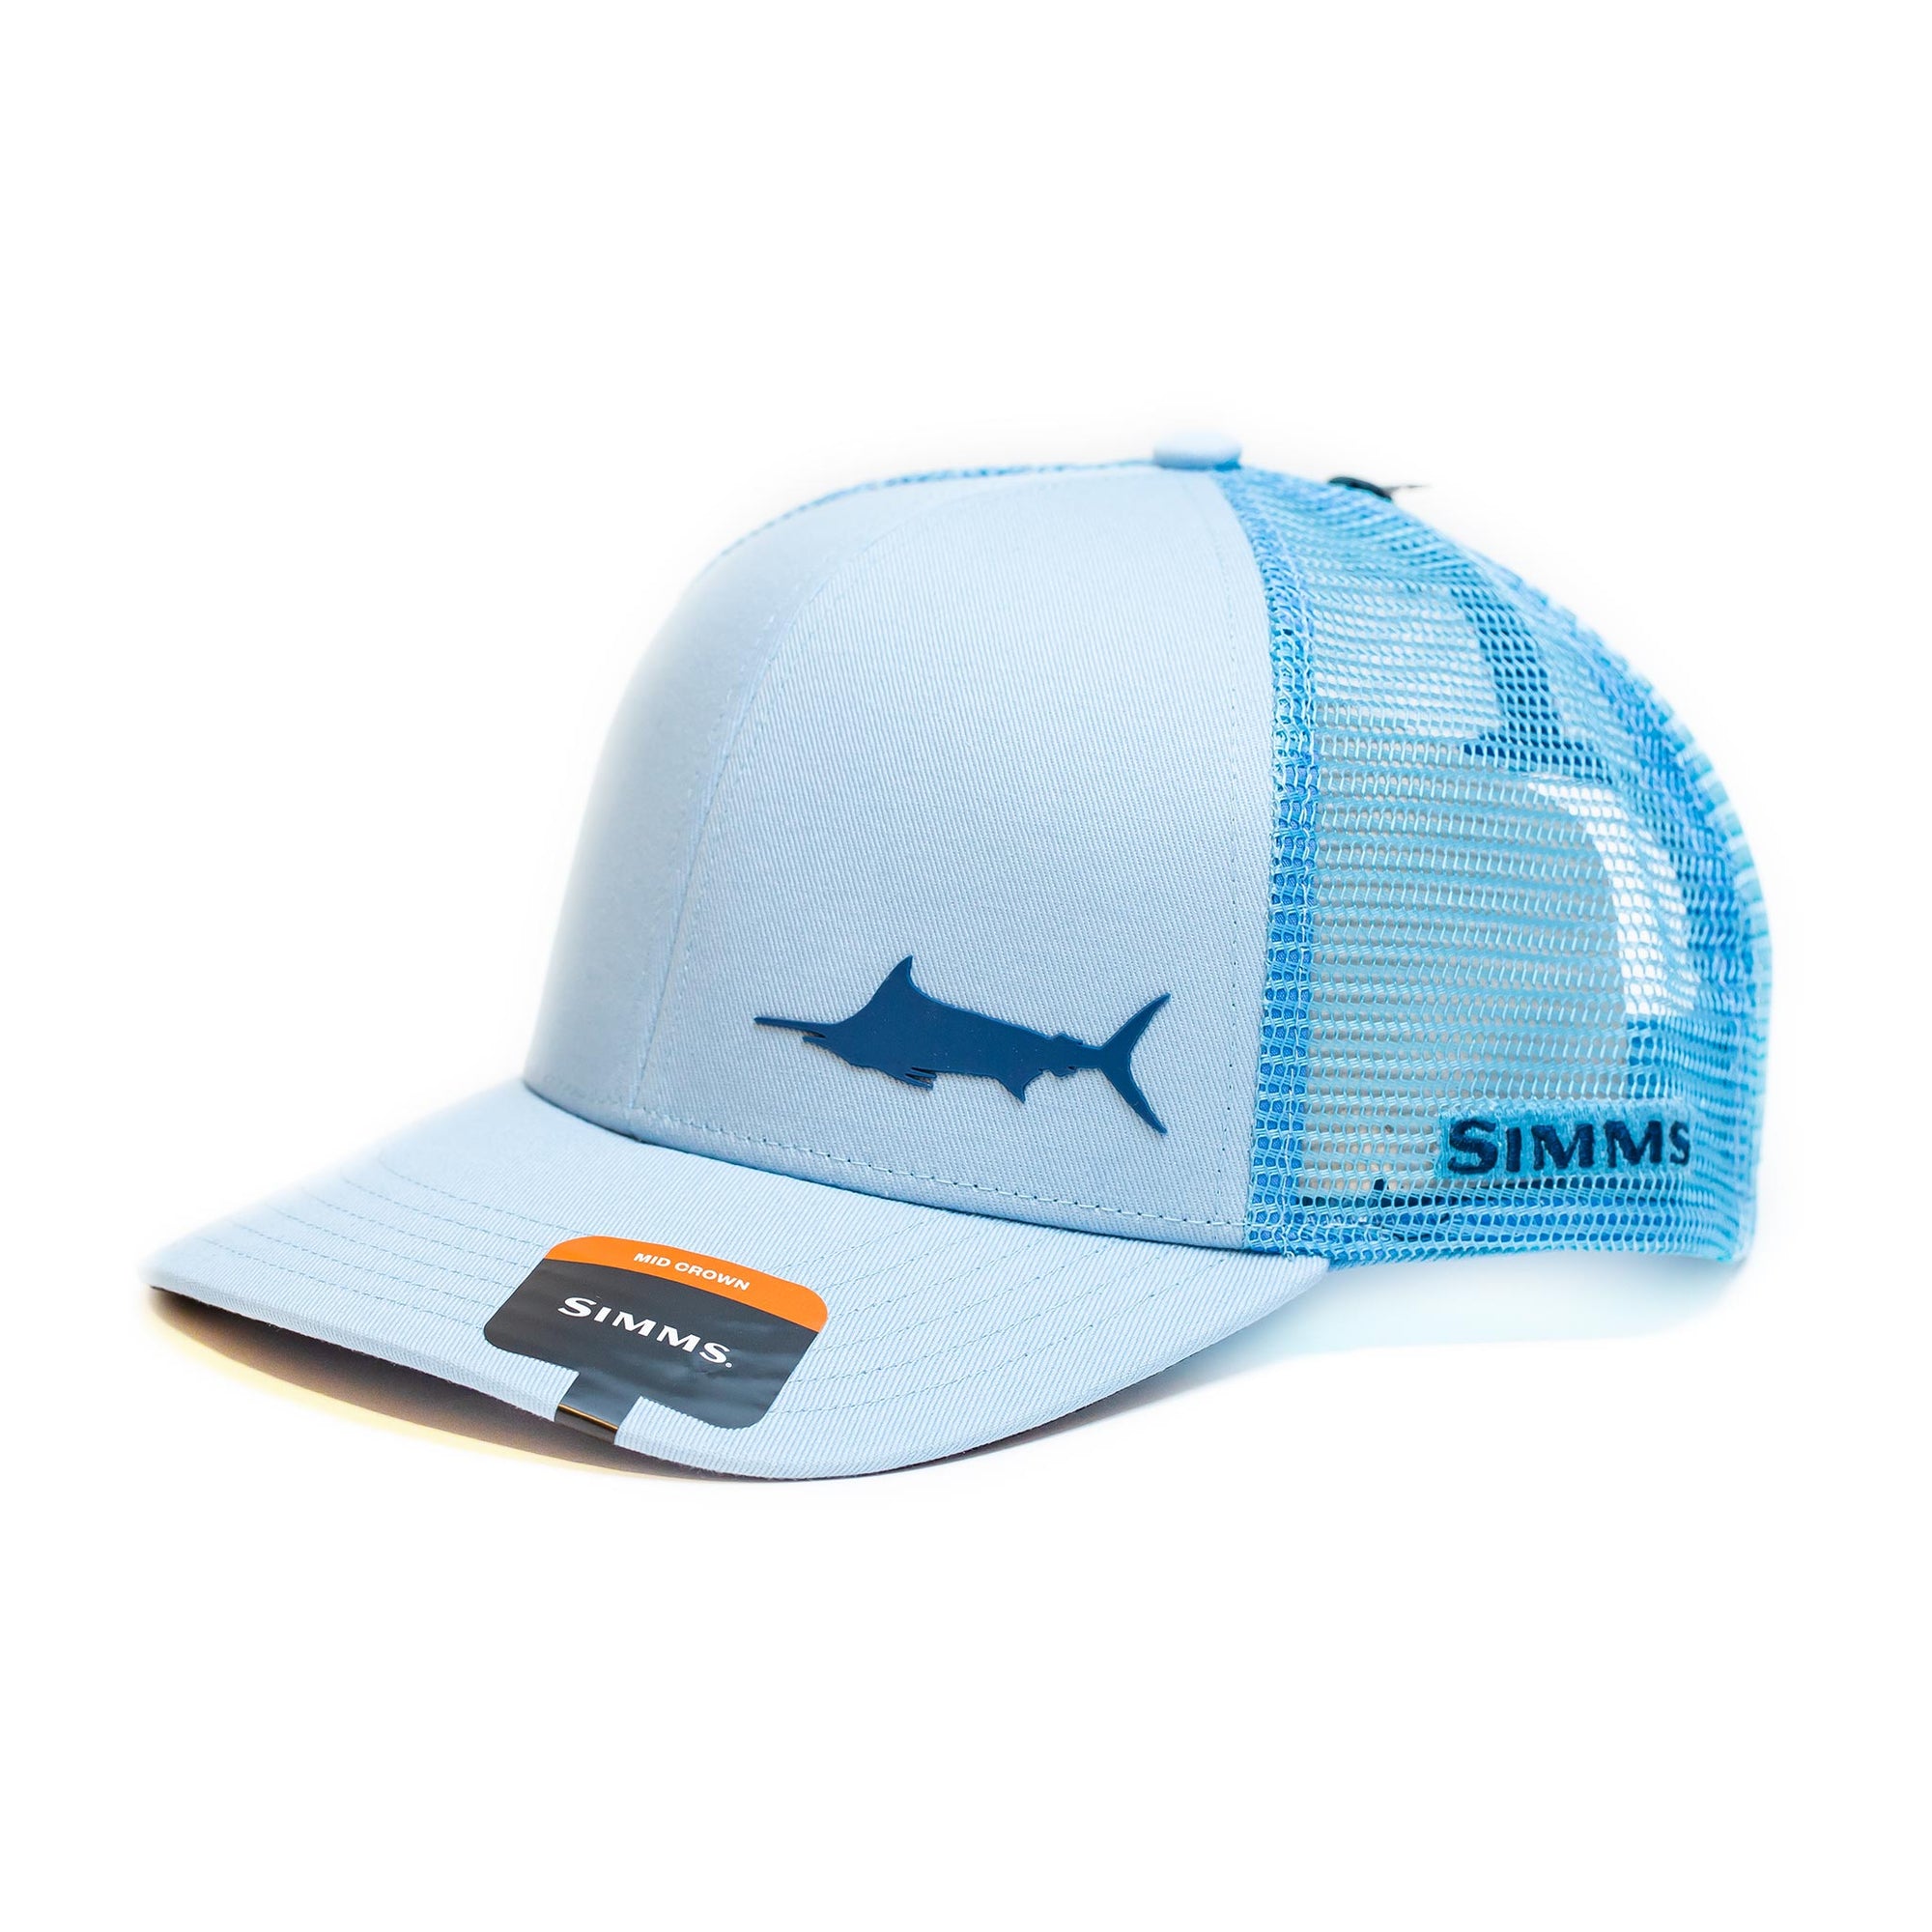 Simms Payoff Trucker Marlin Grey Blue Cap - Compleat Angler Nedlands